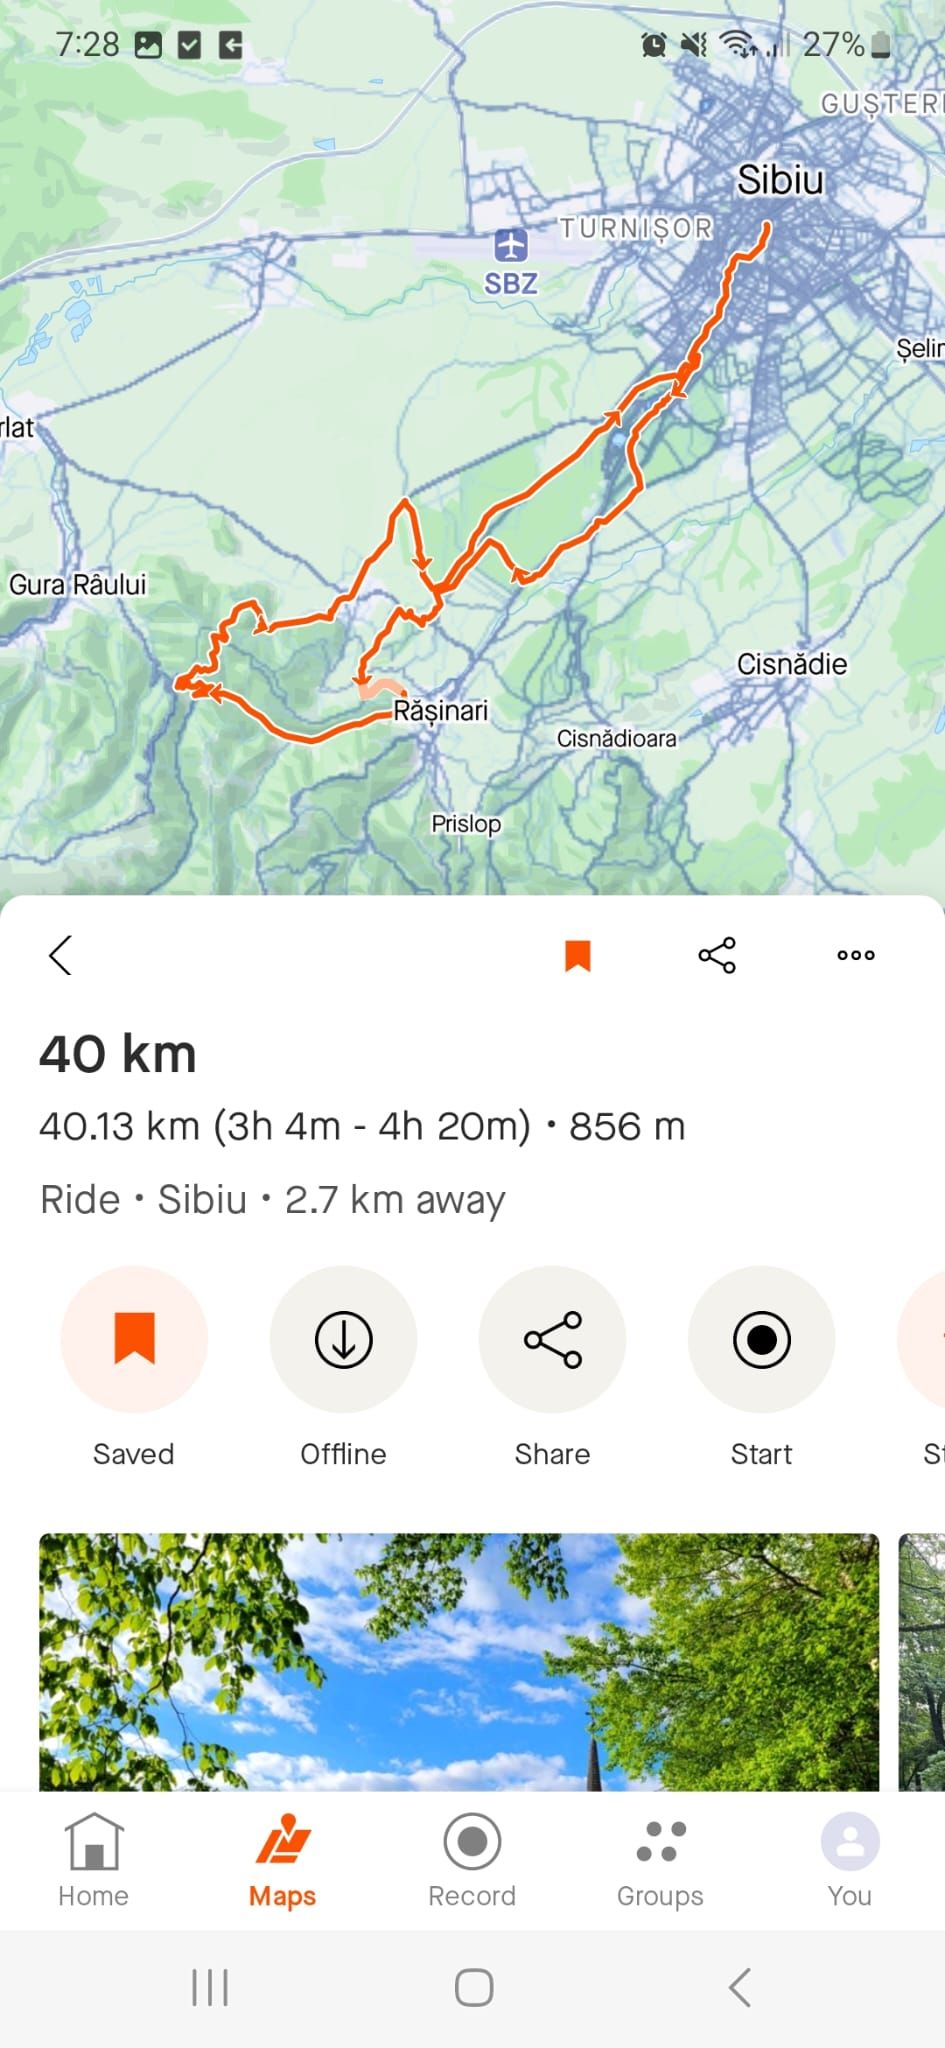 Start following a saved route on Strava